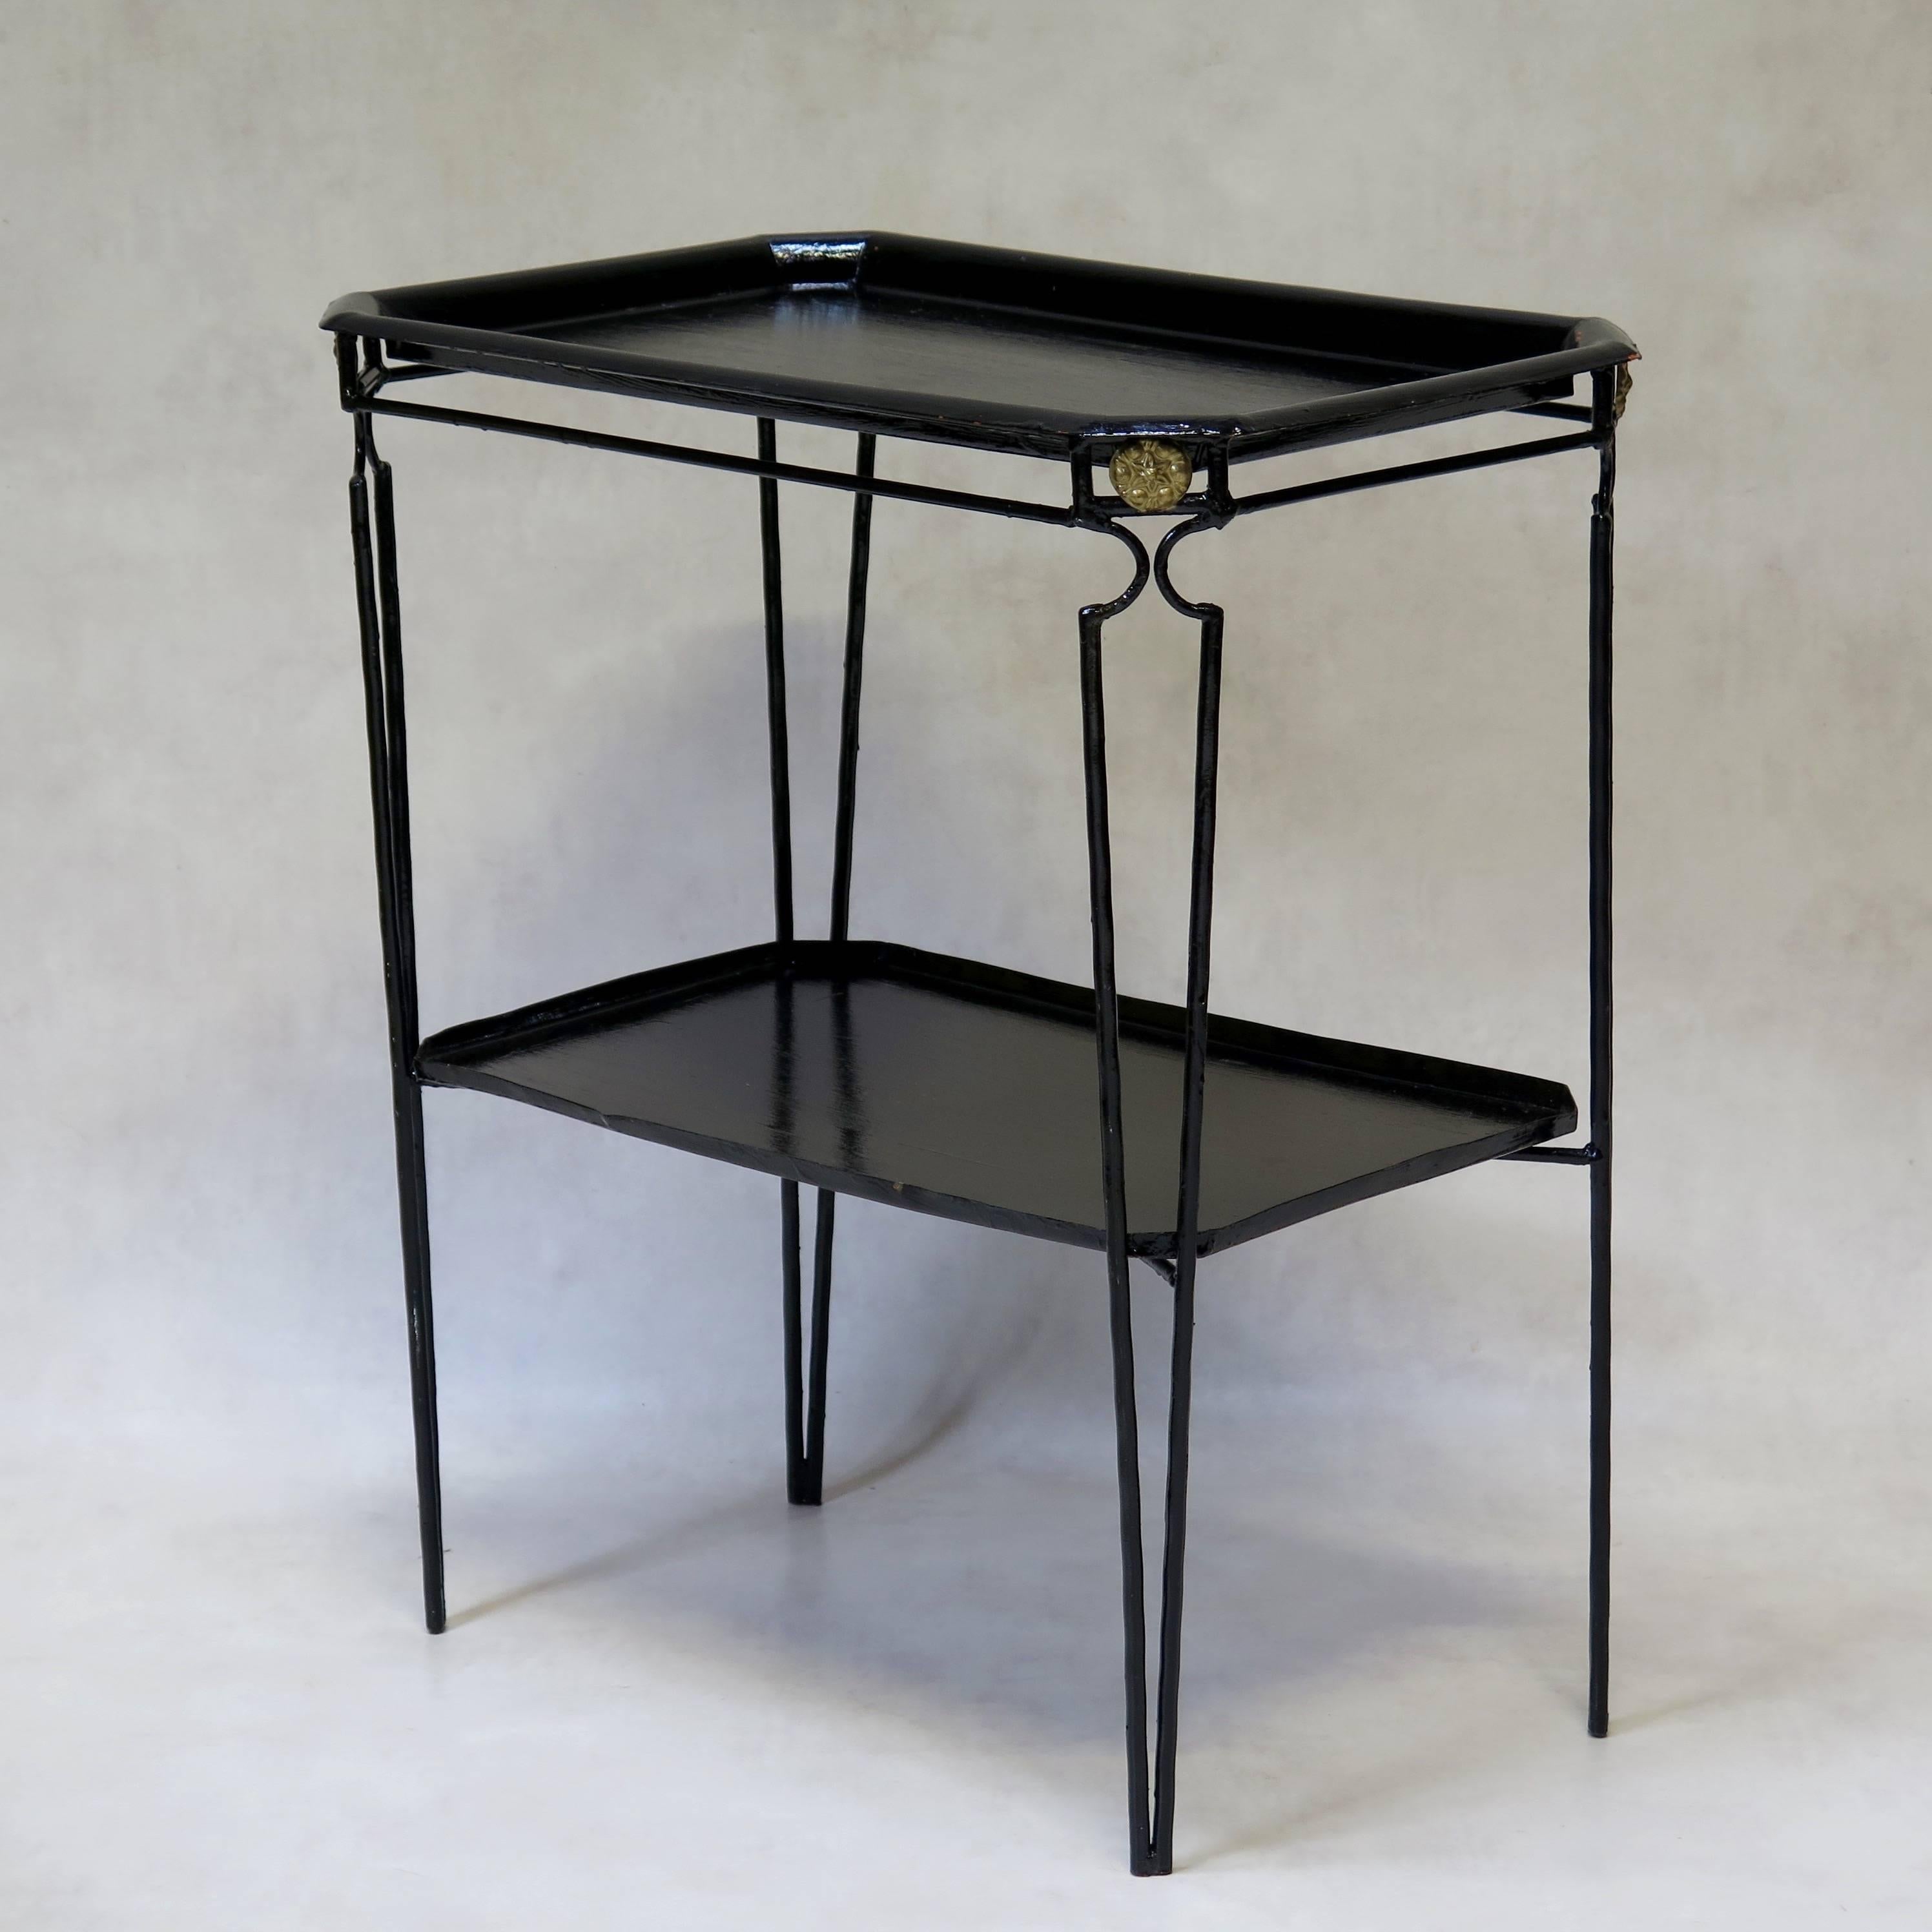 French Four Black Painted Metal Tray Tables in the 1940s Style, France, circa 1960s For Sale